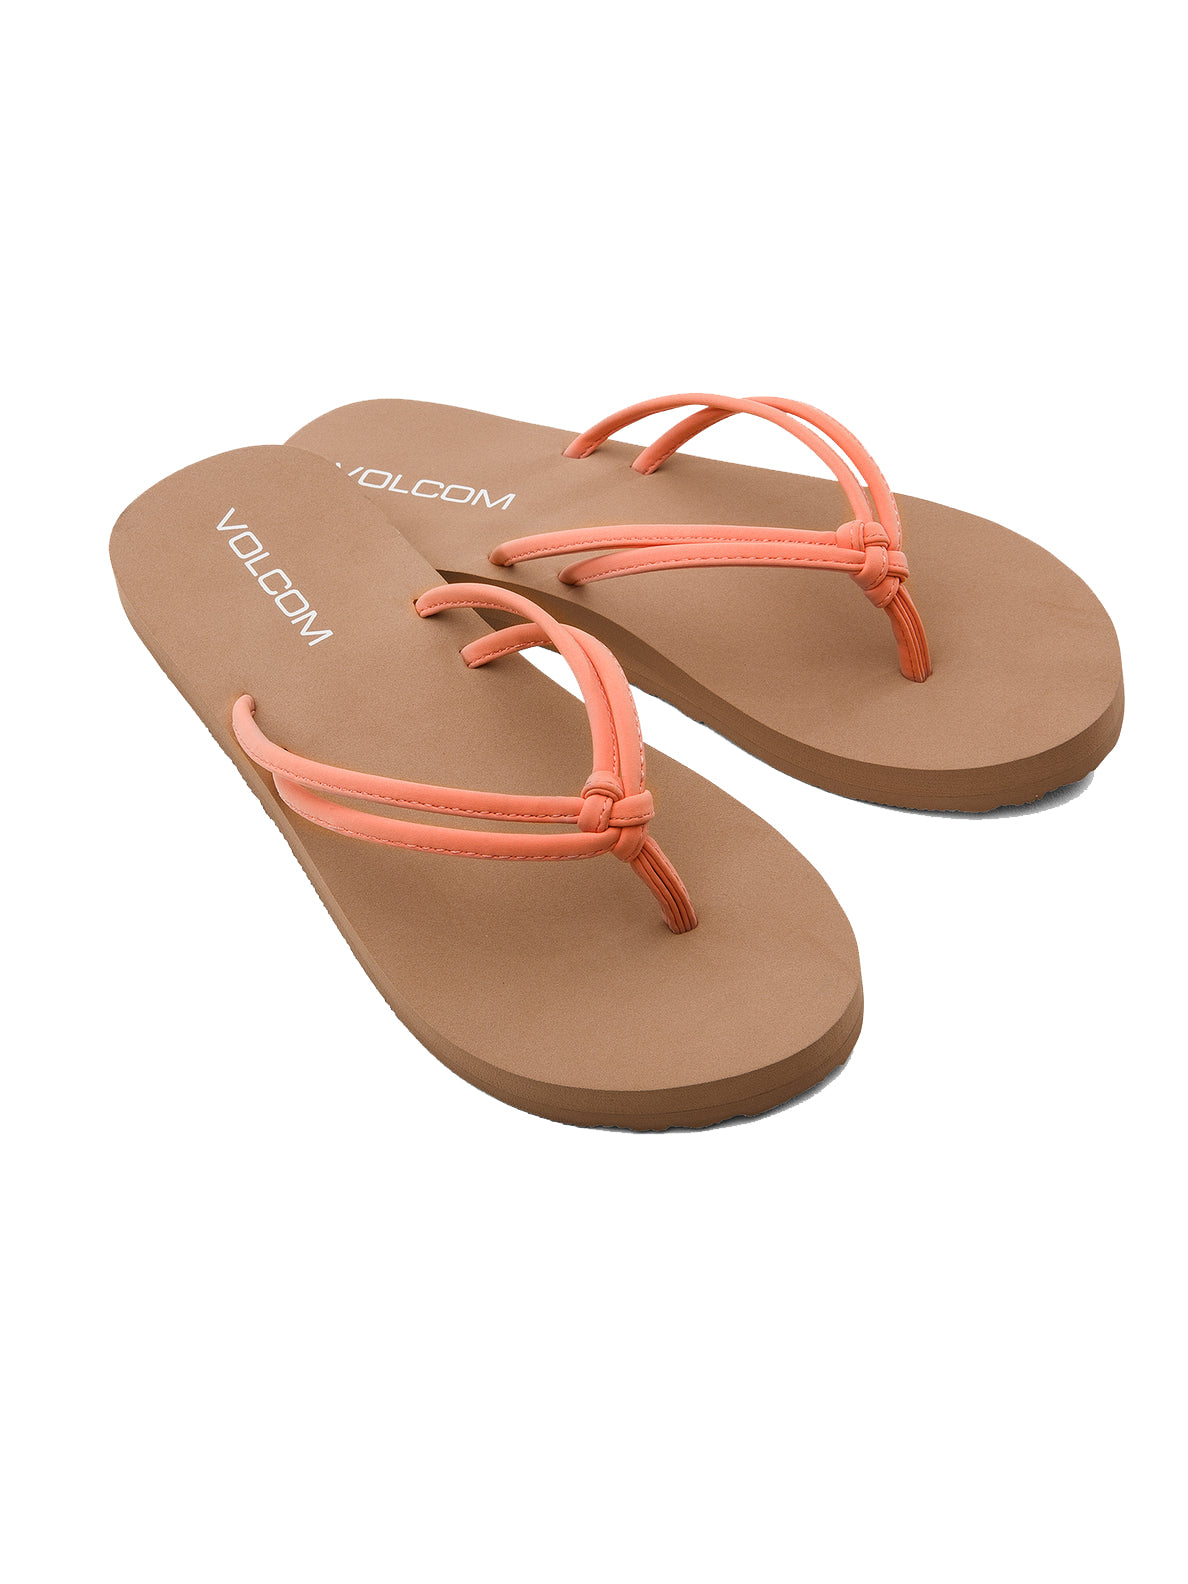 Volcom Forever and Ever Big Youth Girls Sandal PAY-Papaya 4 Y